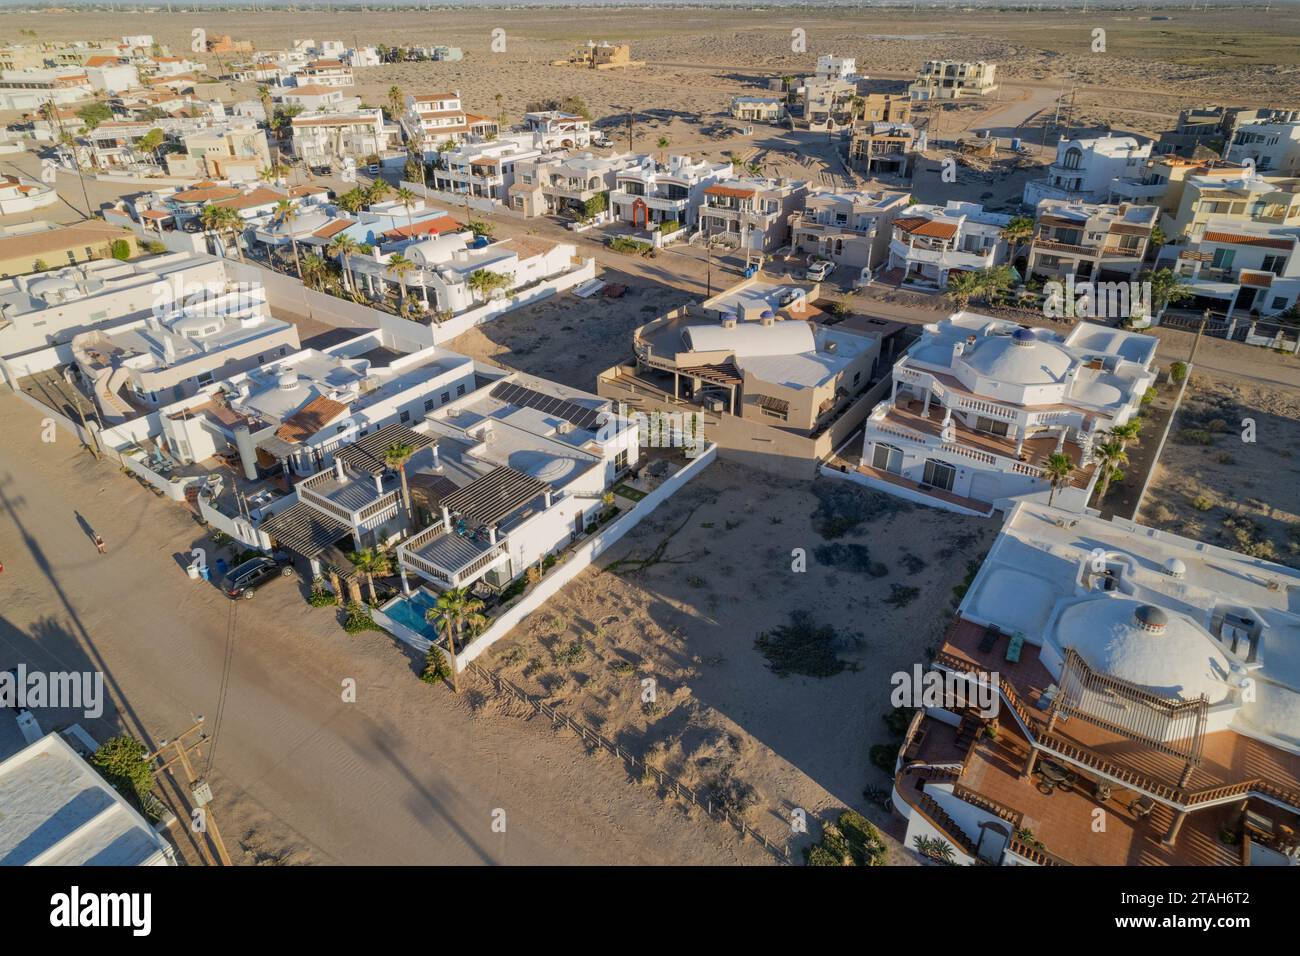 An aerial view of the Las Conchas neighborhood in Puerto Penasco, Sonora, Mexico is seen from above Stock Photo